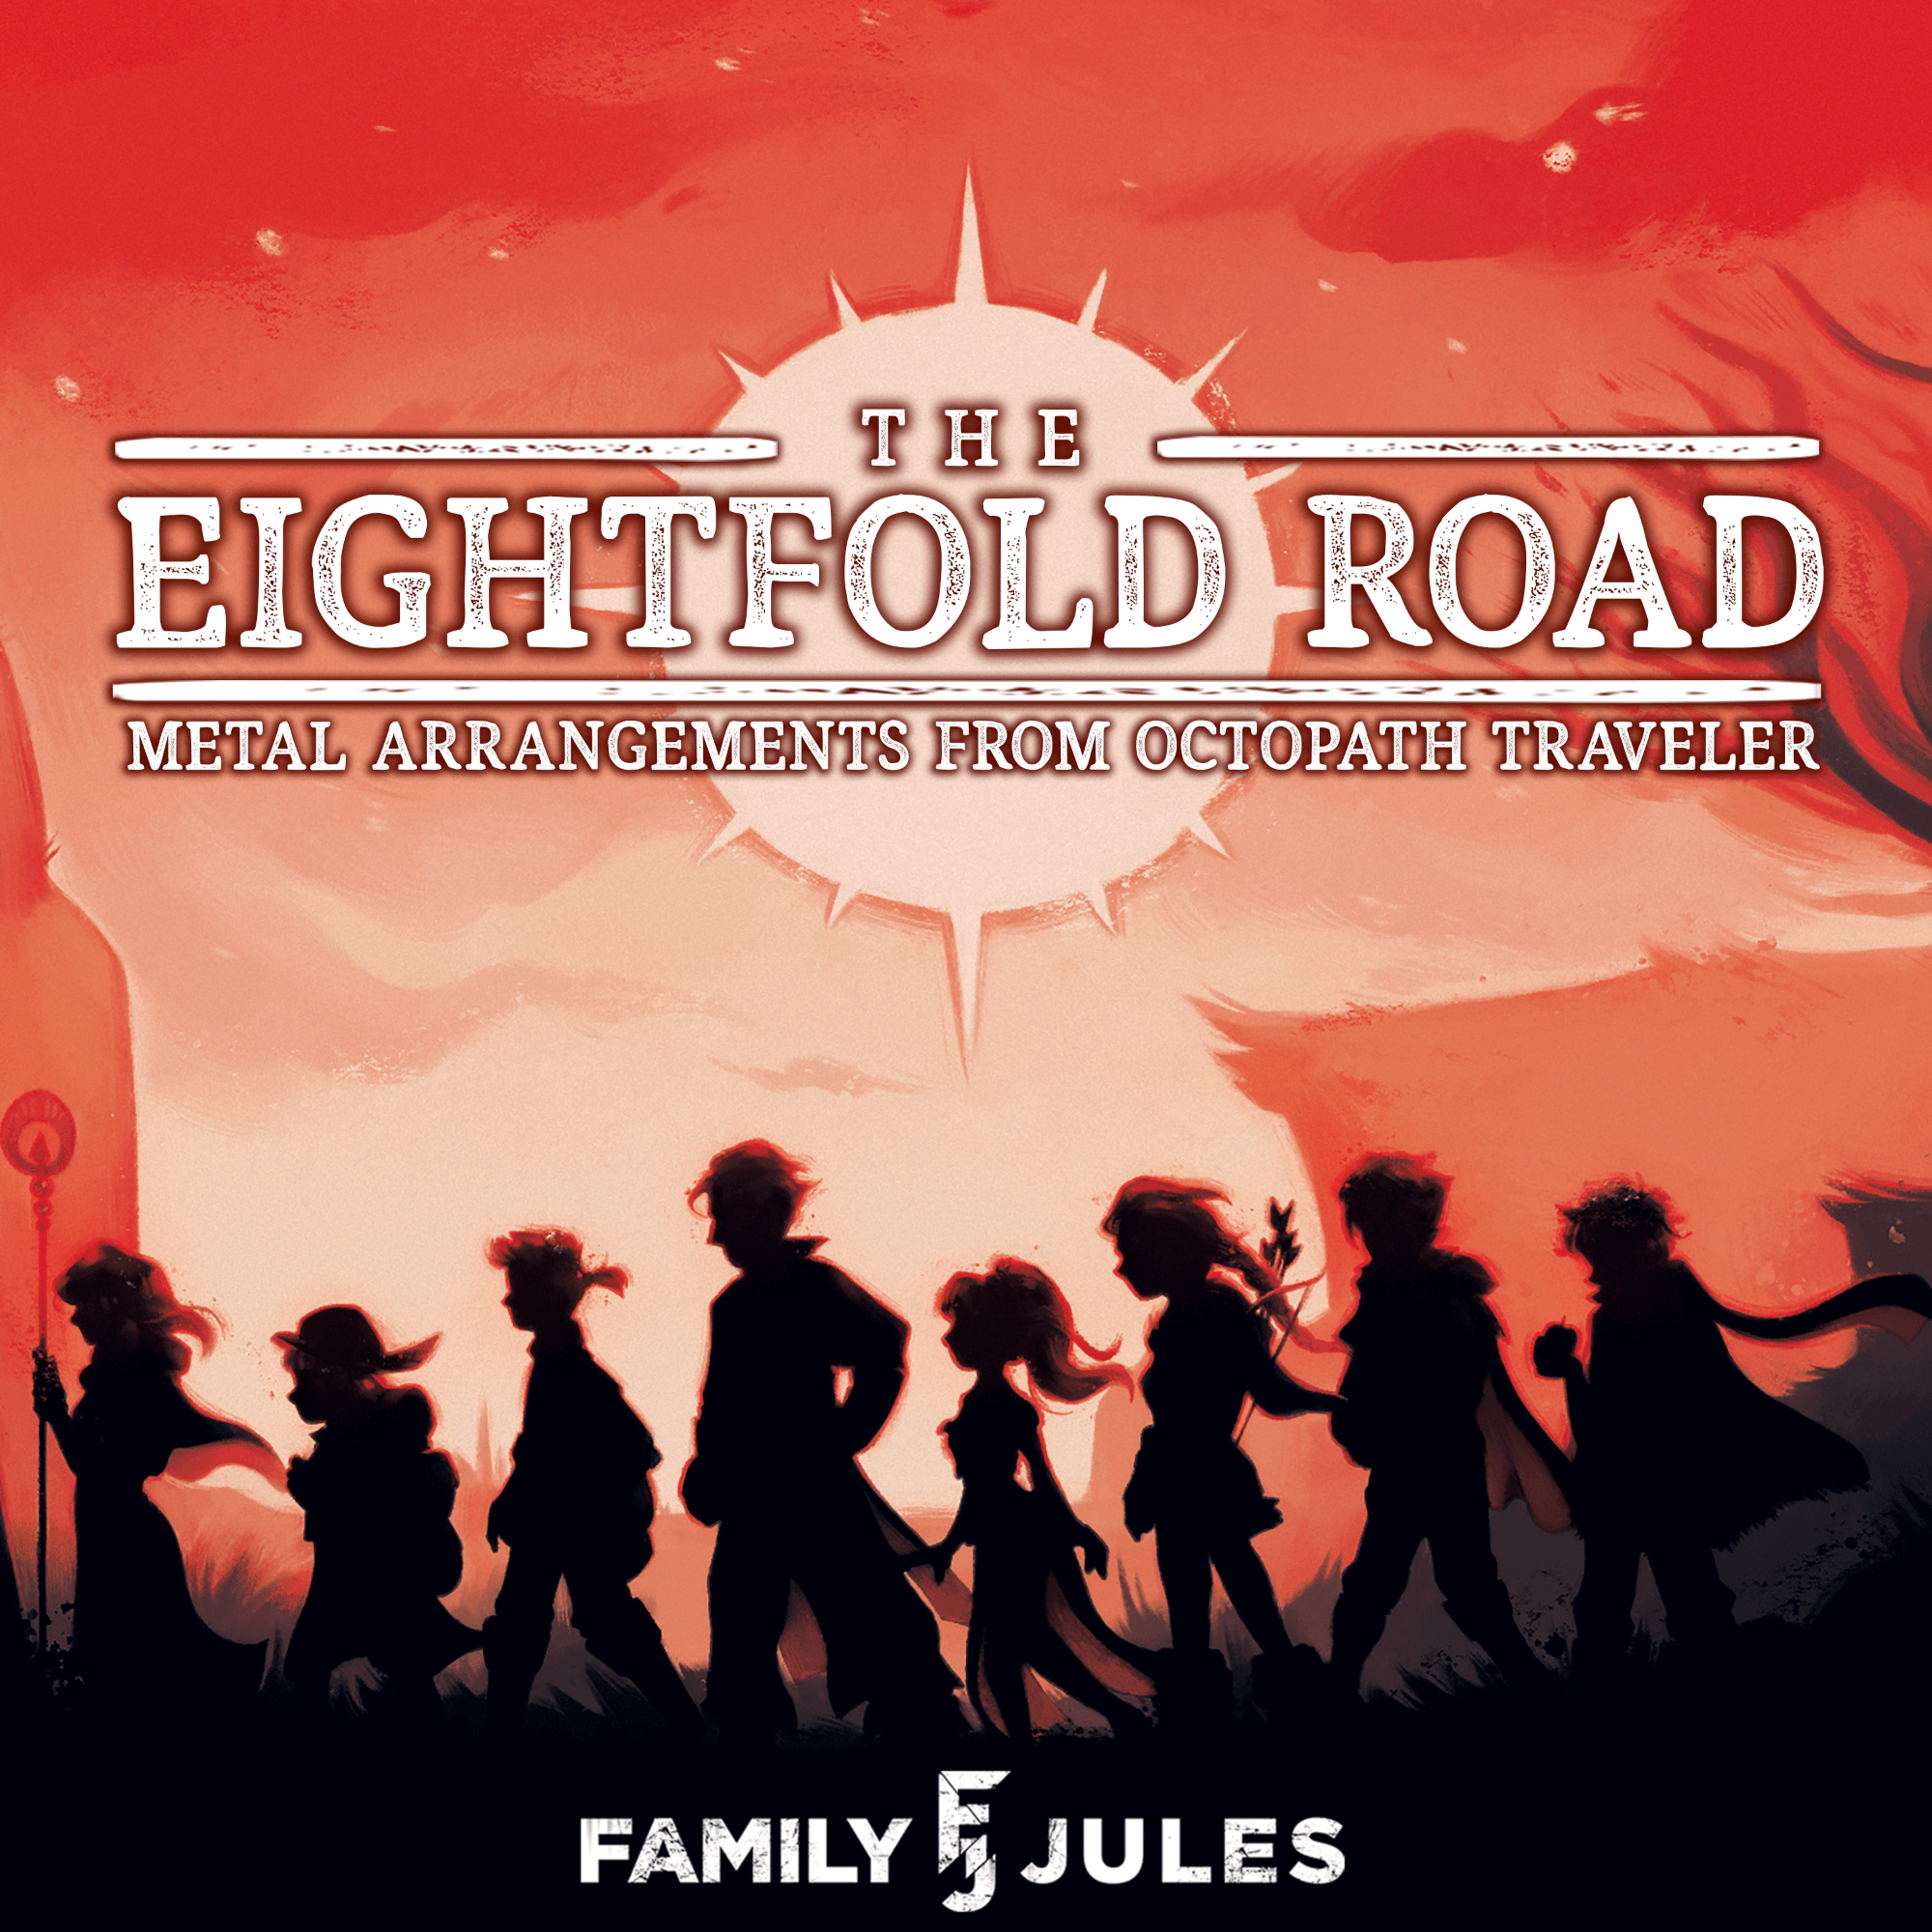 The Eightfold Road